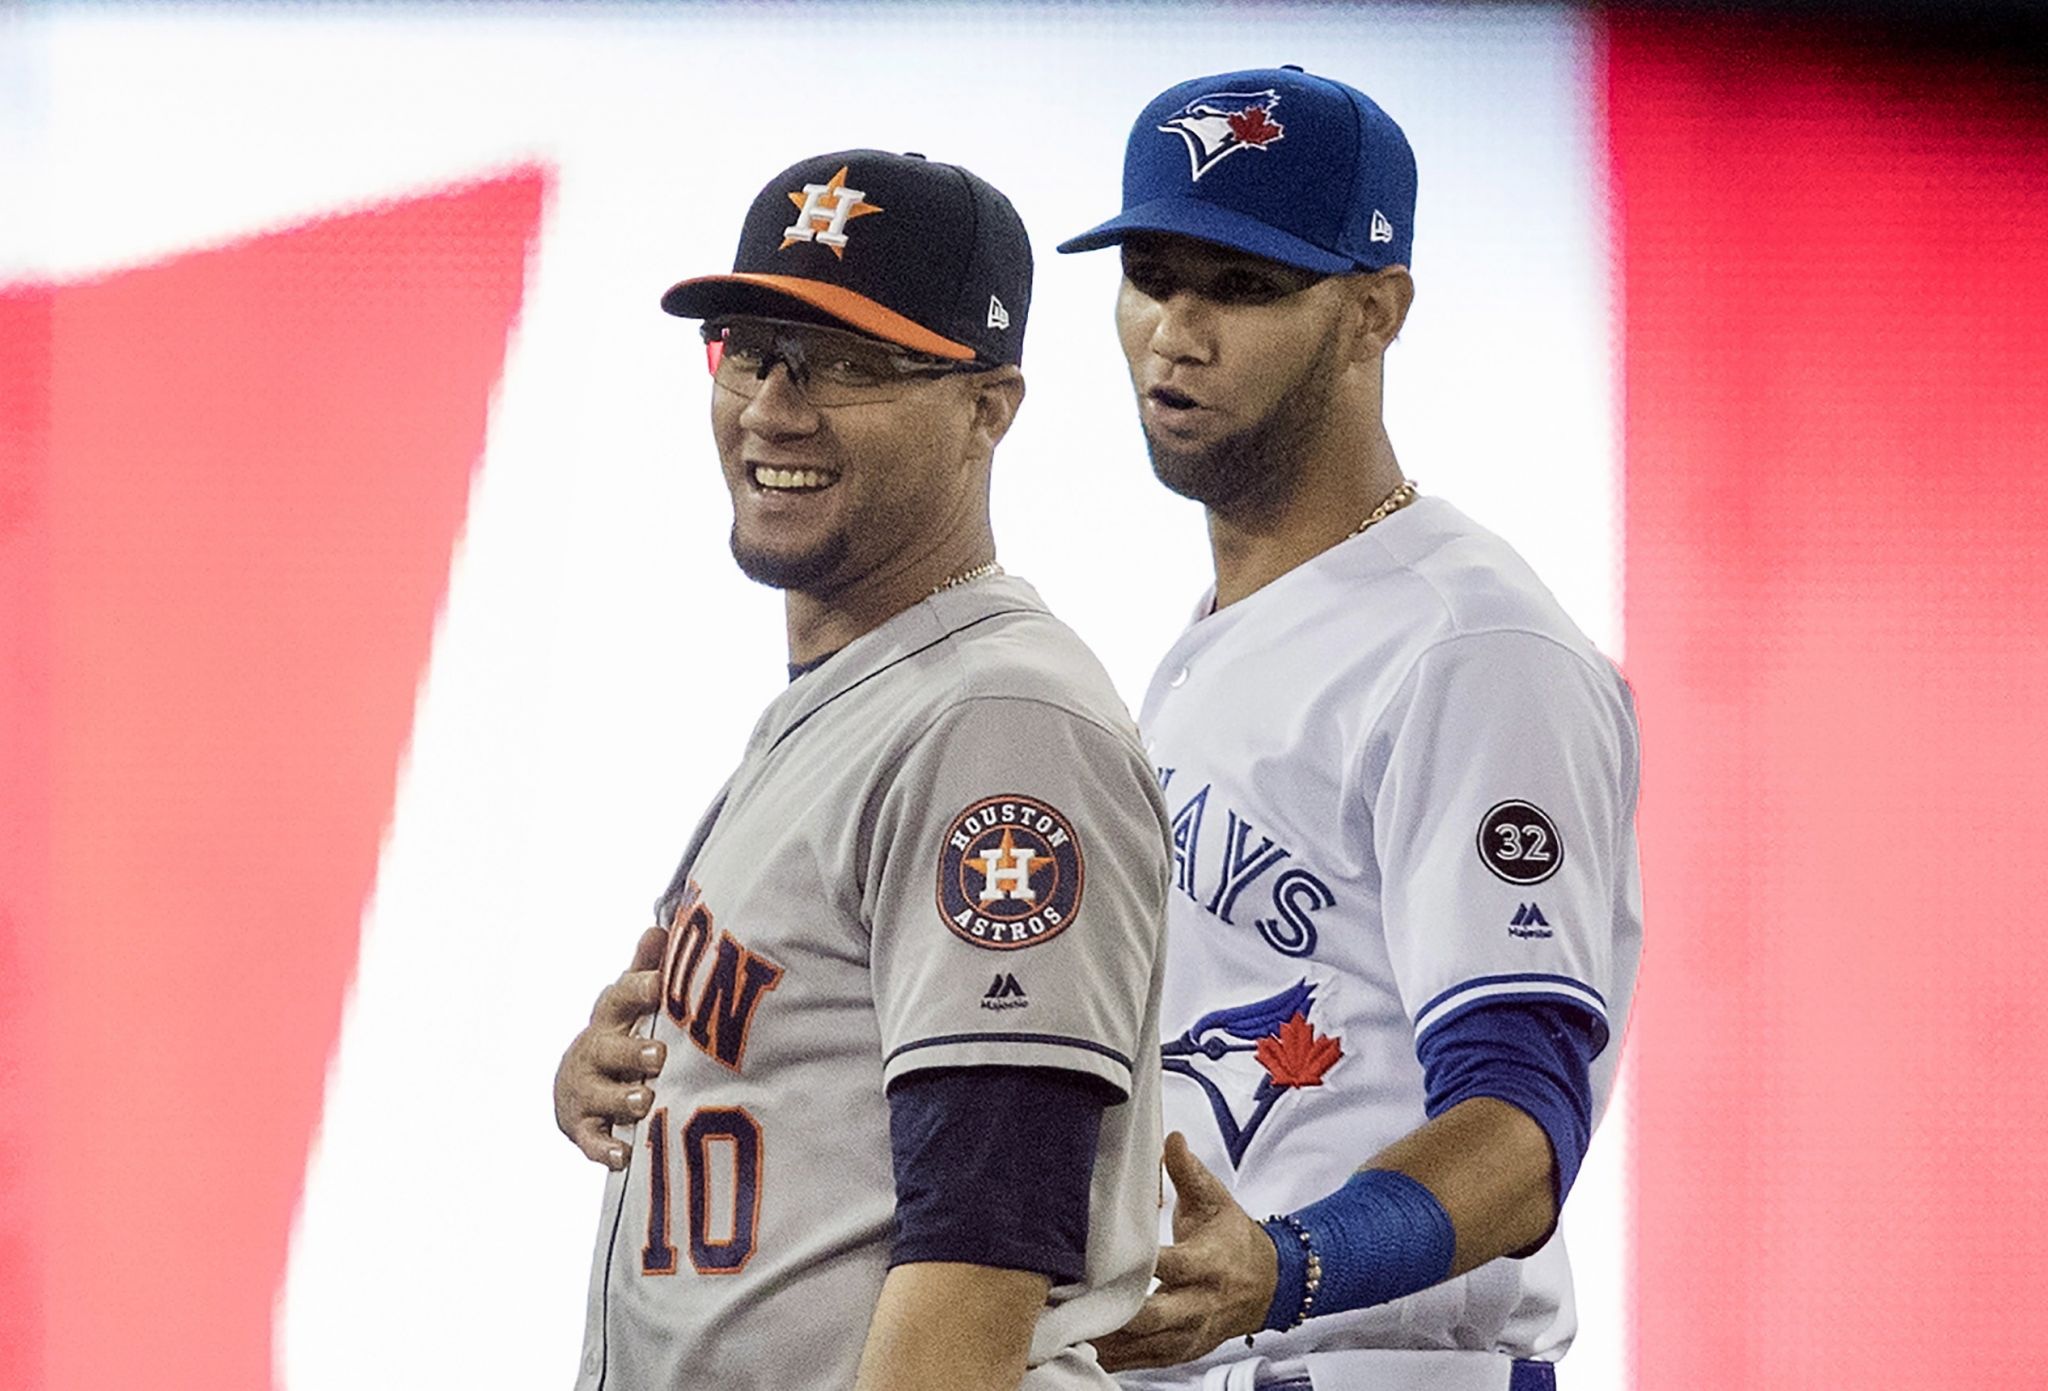 The Gurriel brothers are knocking on the door of the big leagues